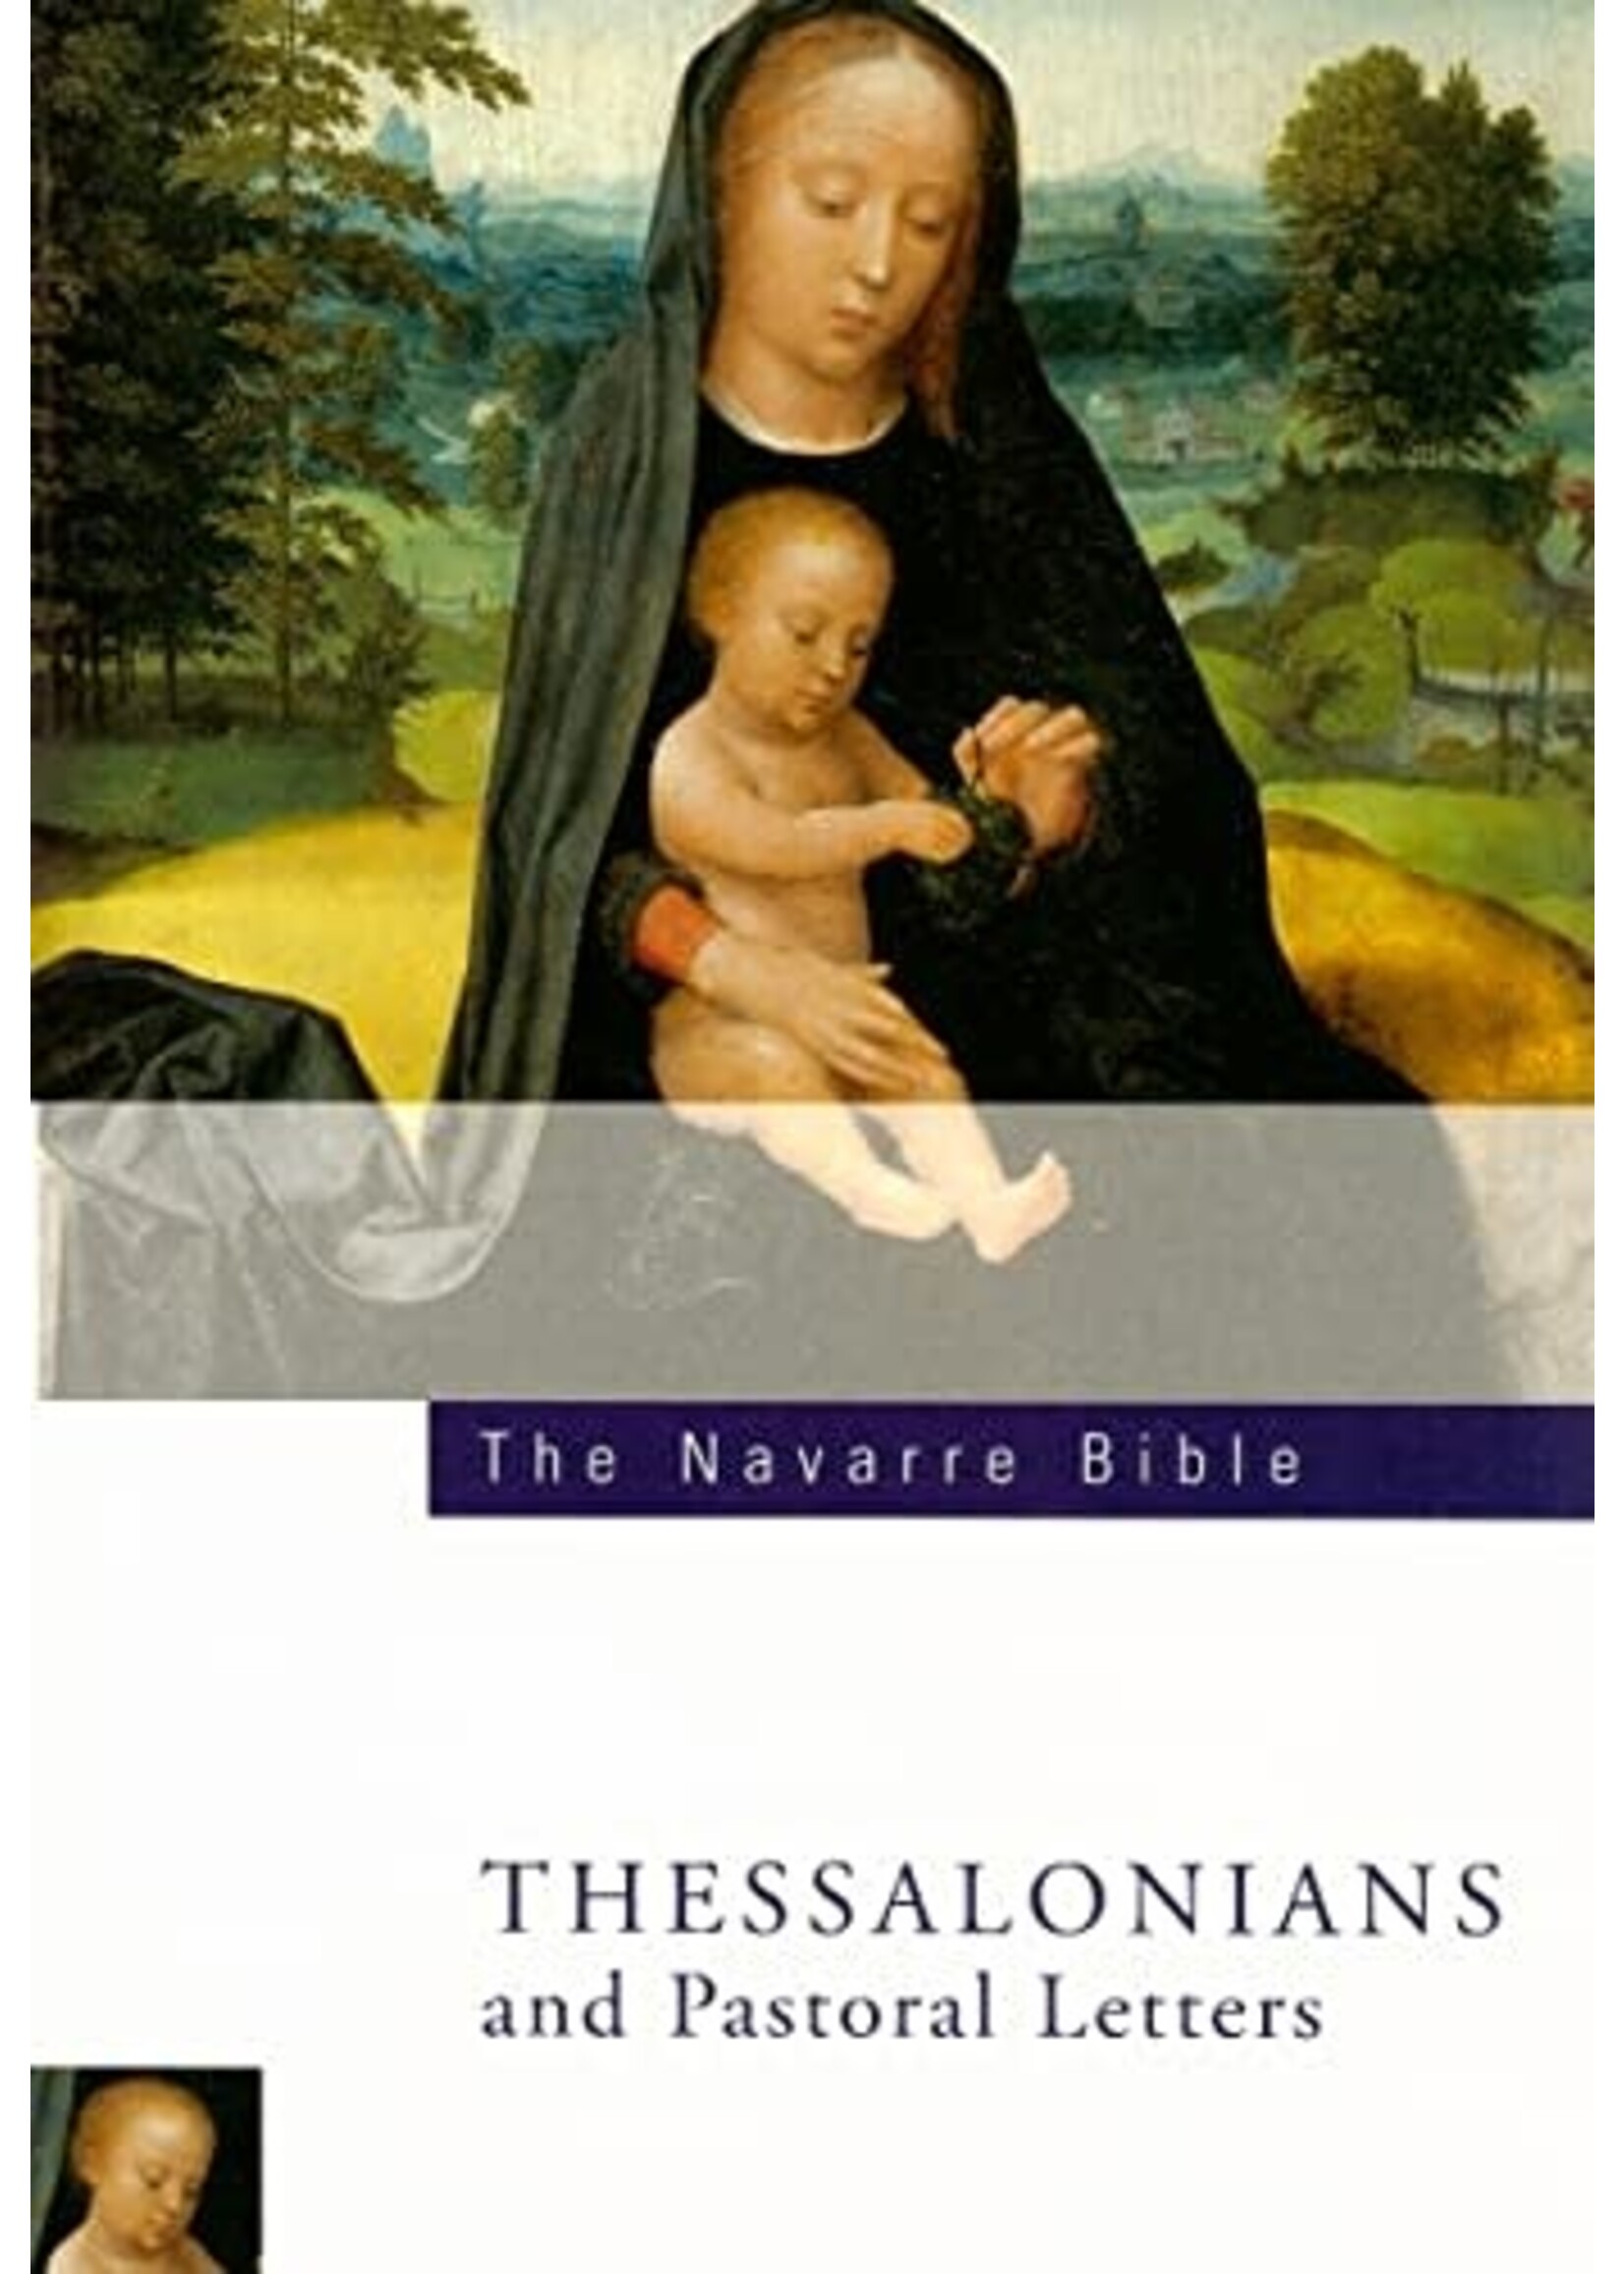 The Navarre Bible: Thessalonians